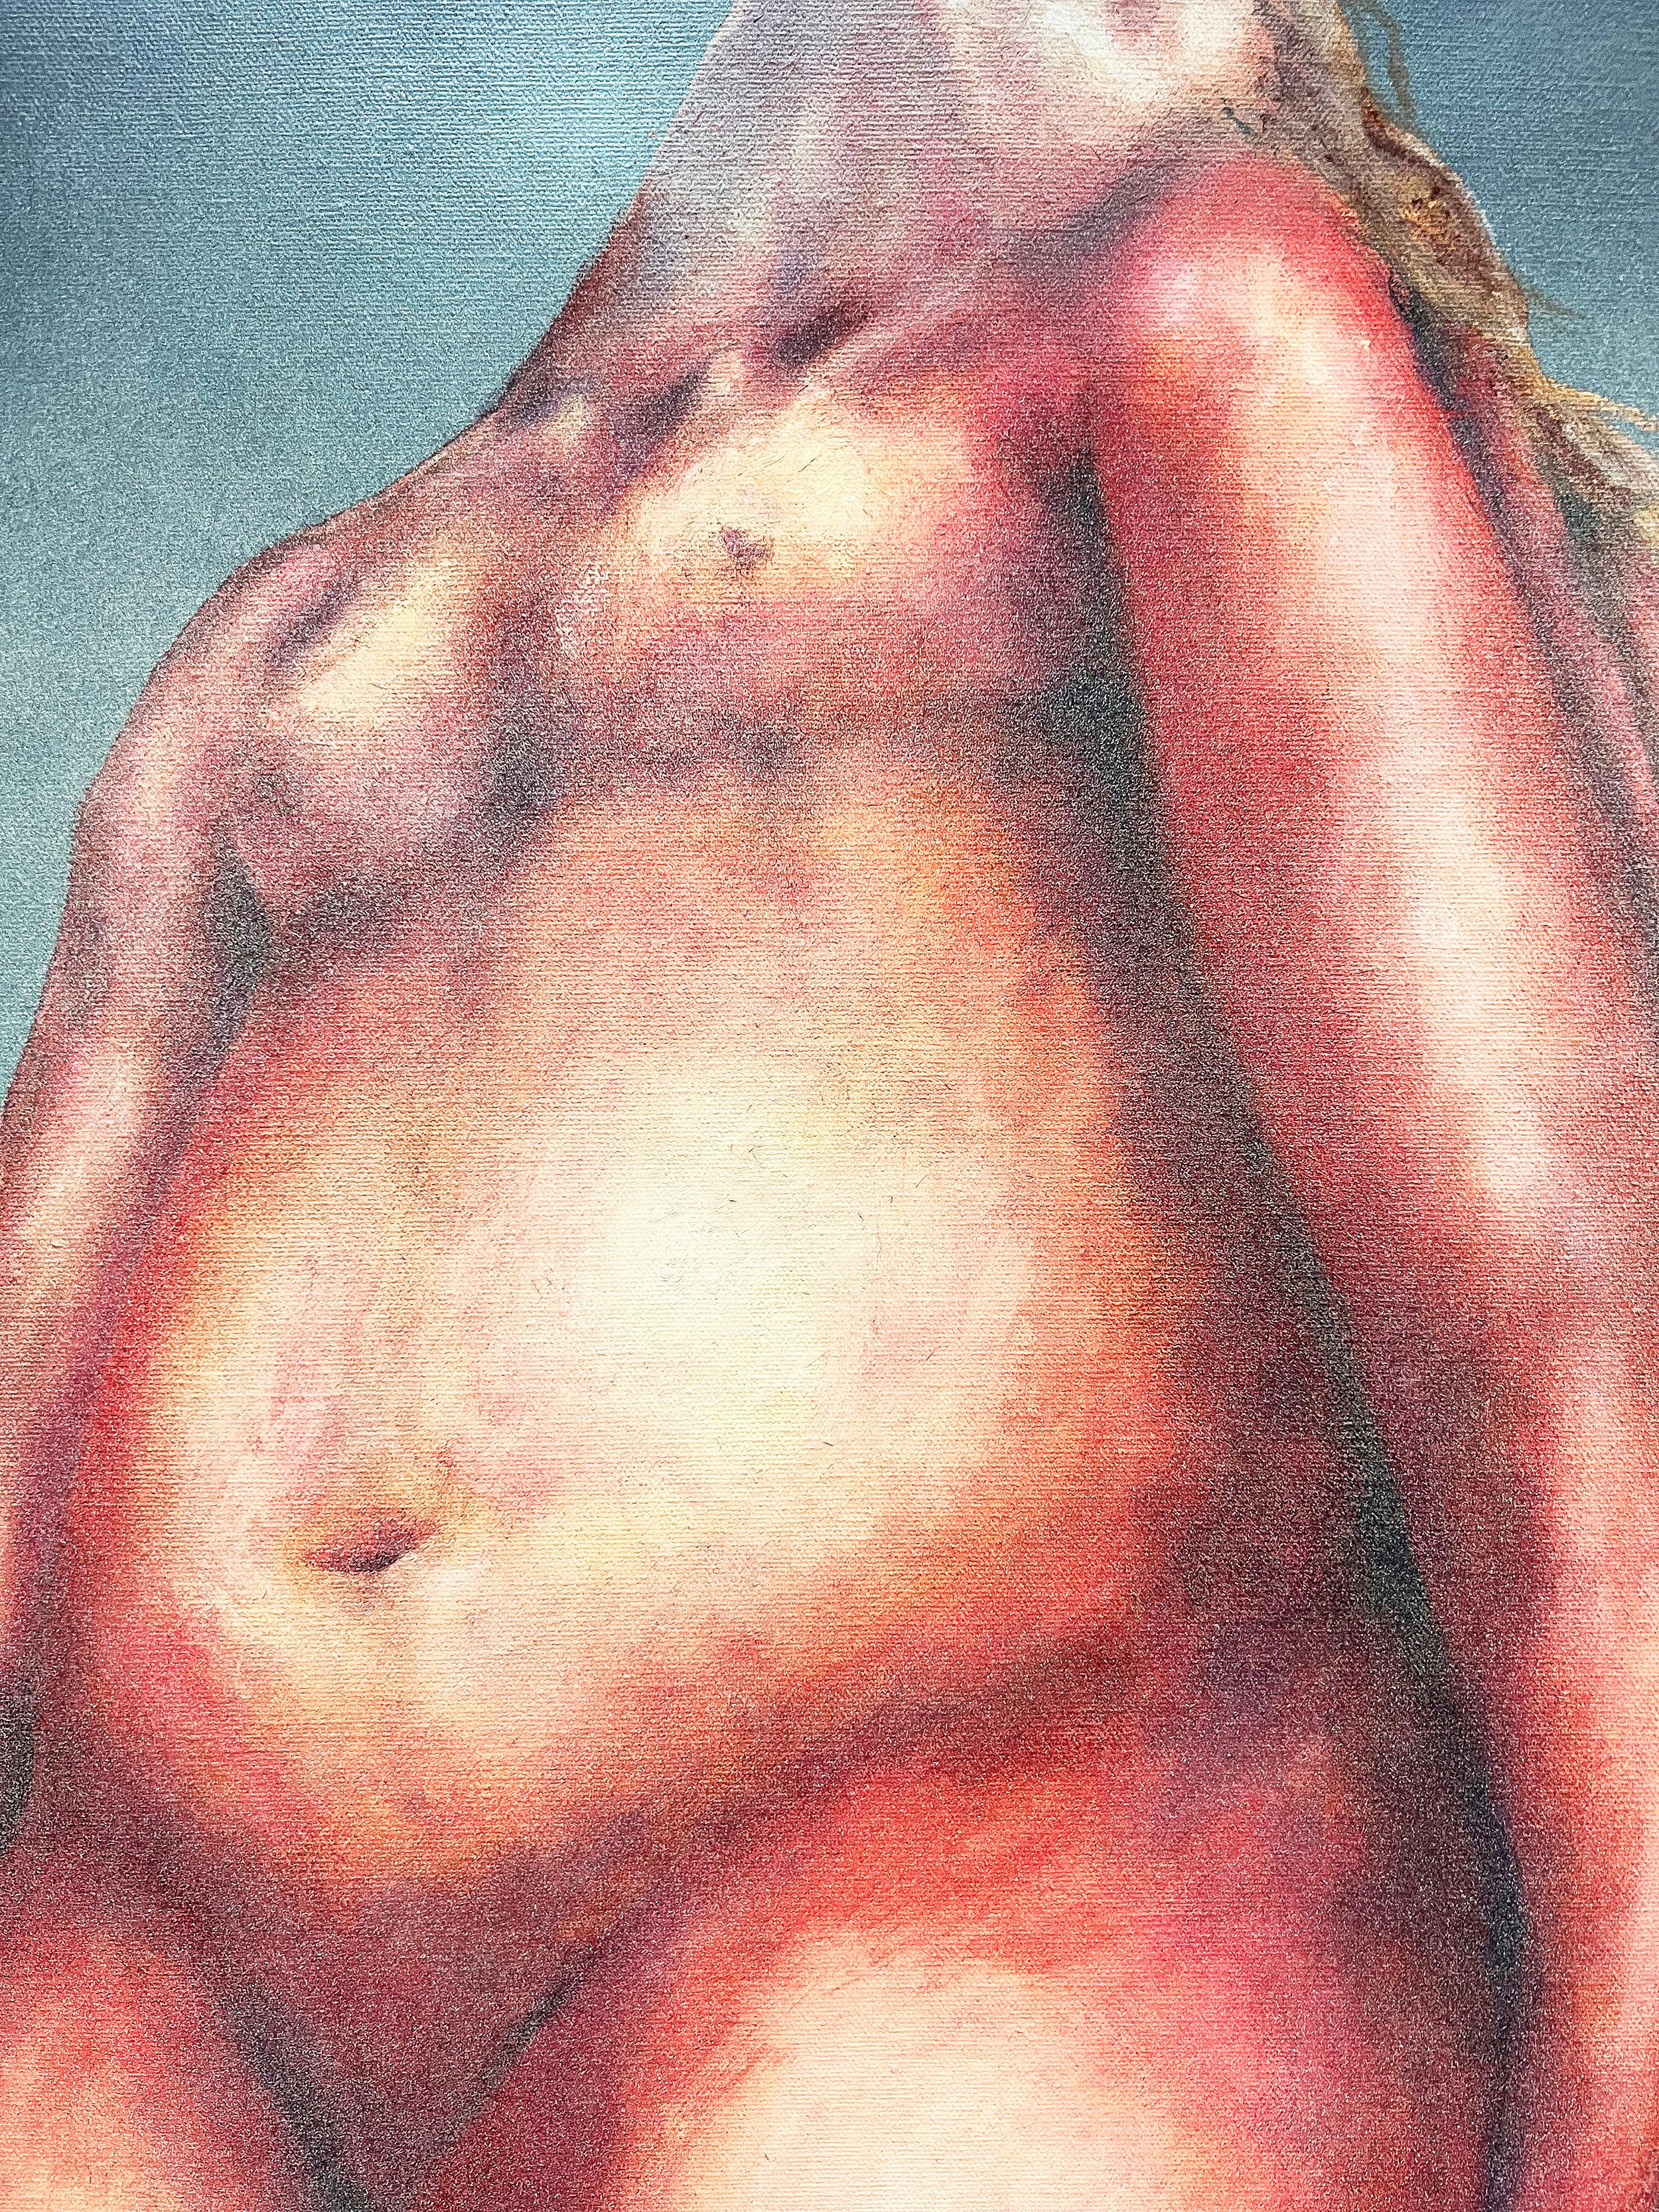 Large vintage C. Pickett fuller surrealist nude oil painting on canvas

Offered for sale is a vintage surrealist nude oil painting on canvas by C. Pickett Fuller. Carolyn Pickett Fuller( 1942-2002) was an American artist who exhibited in the U. S.